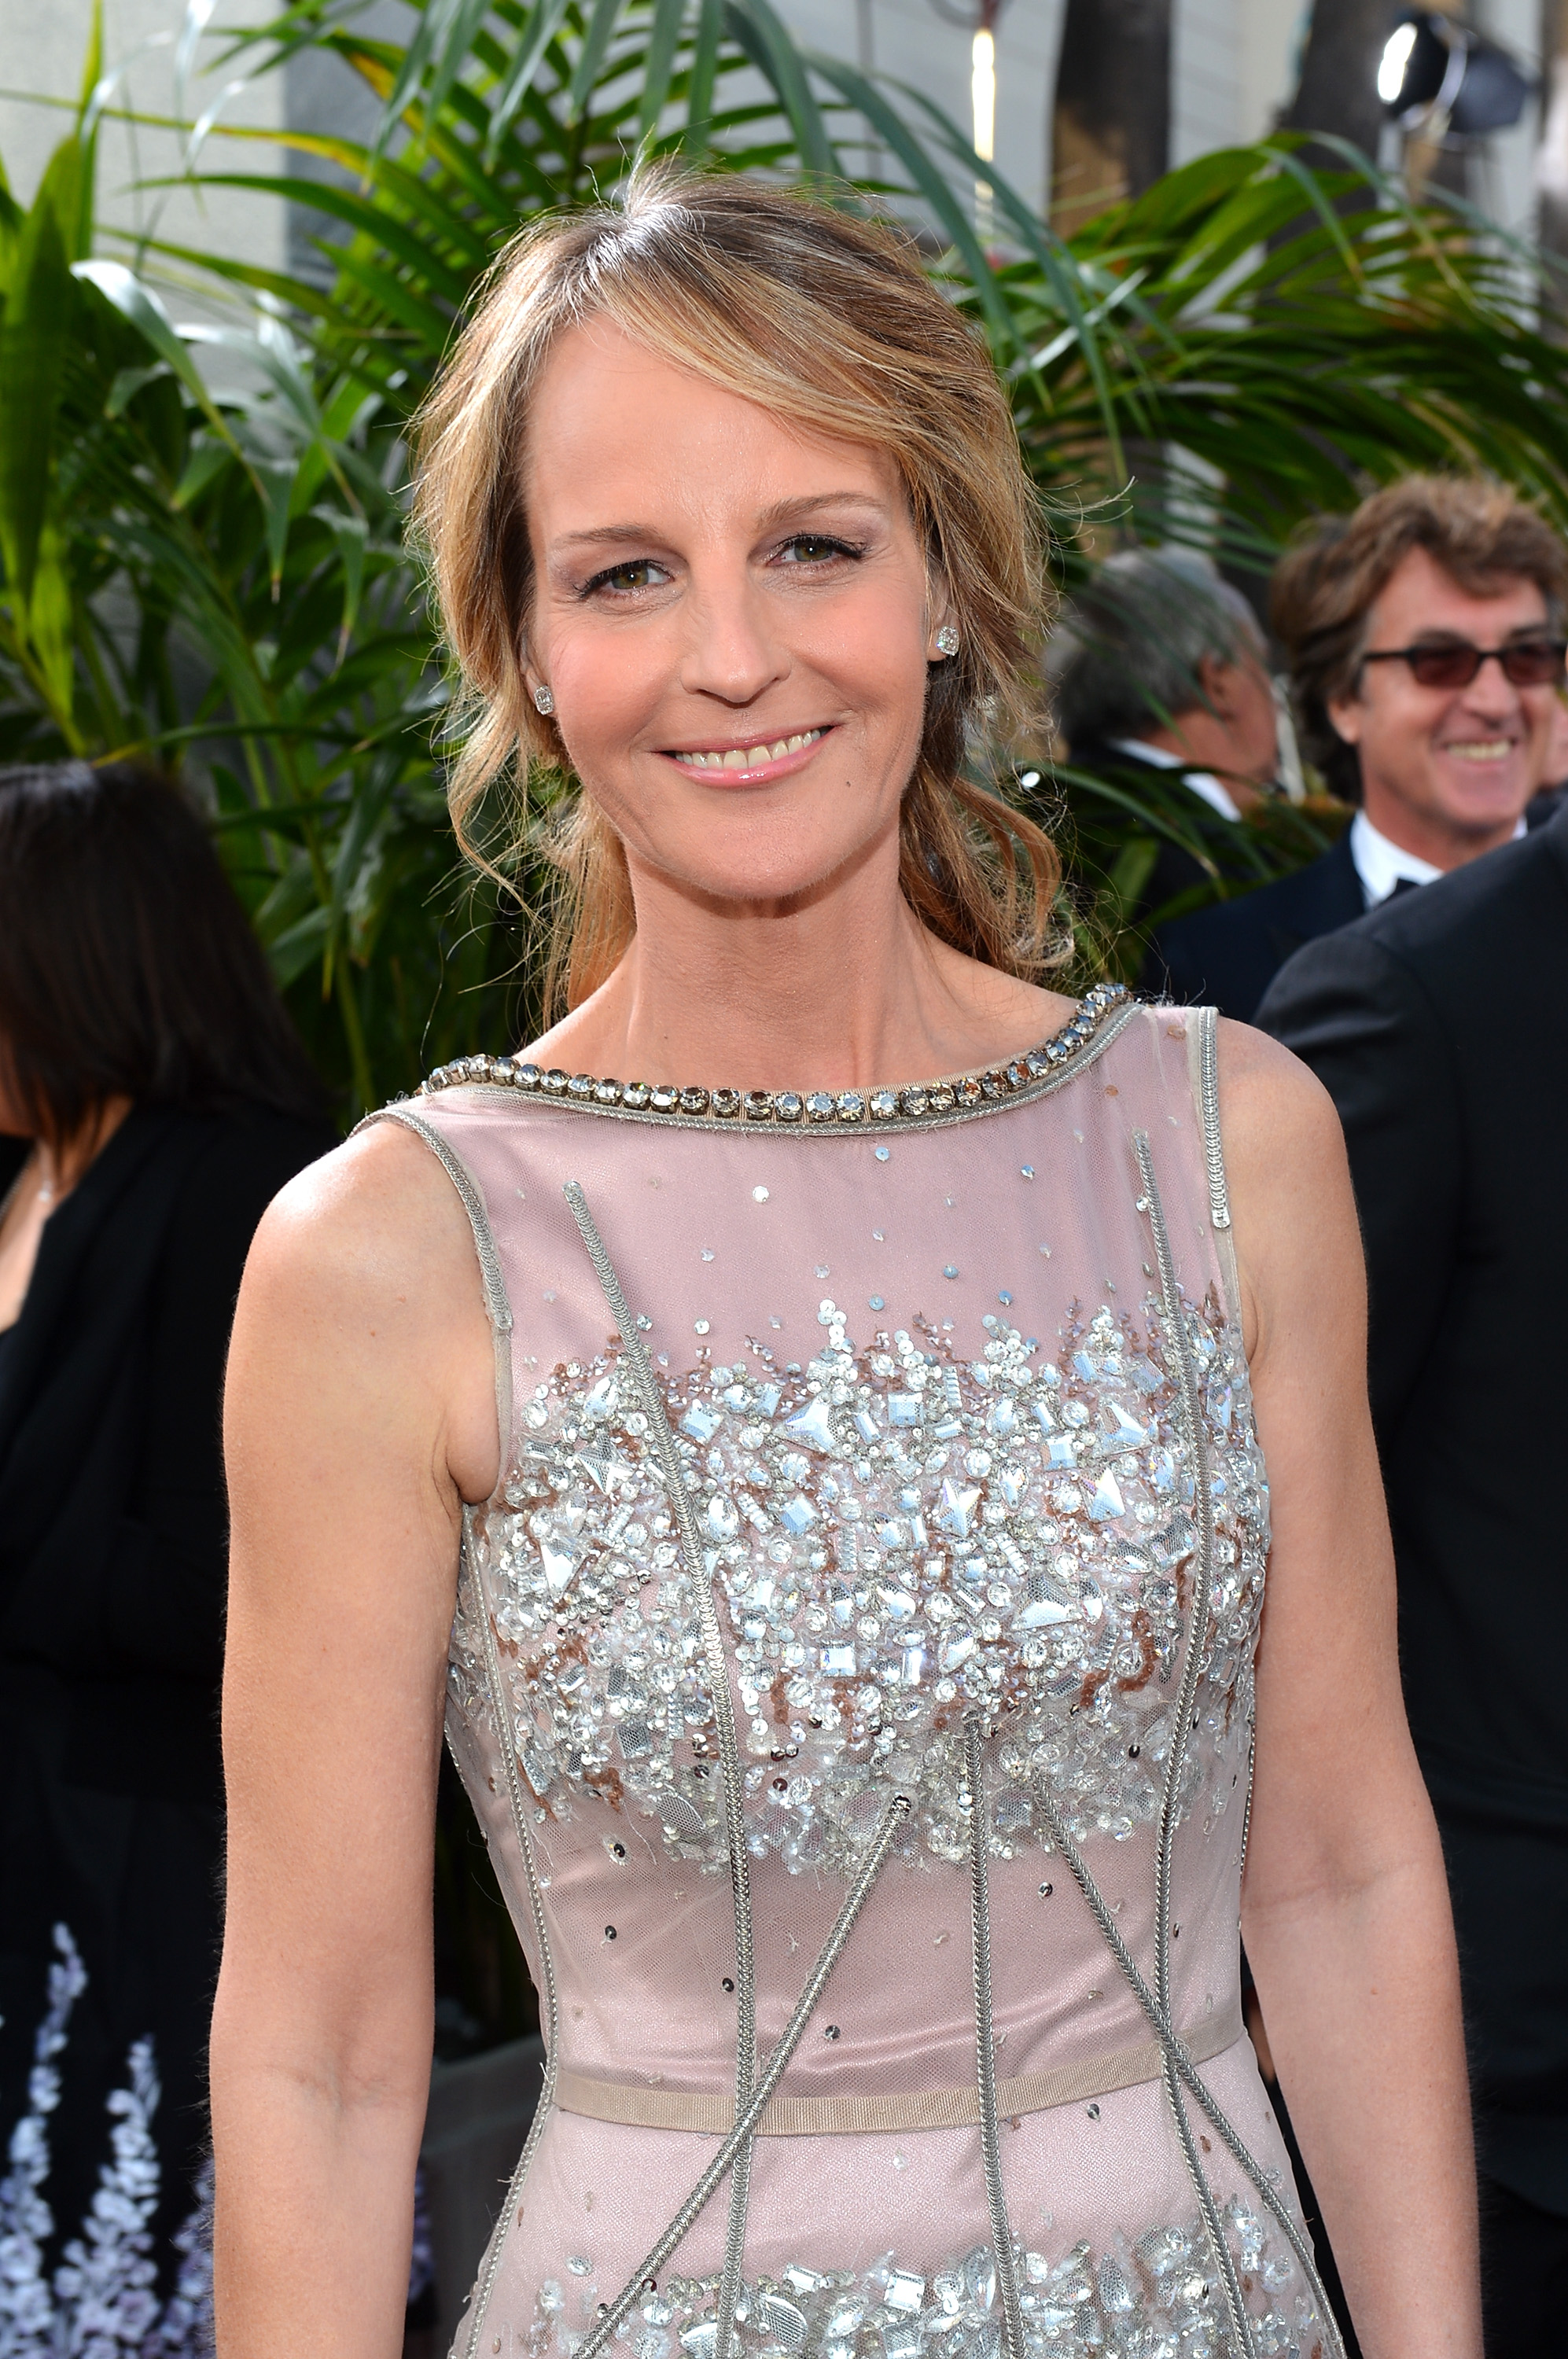 Helen Hunt at the 70th Annual Golden Globe Awards on January 13, 2013 in Beverly Hills, California. | Source: Getty Images